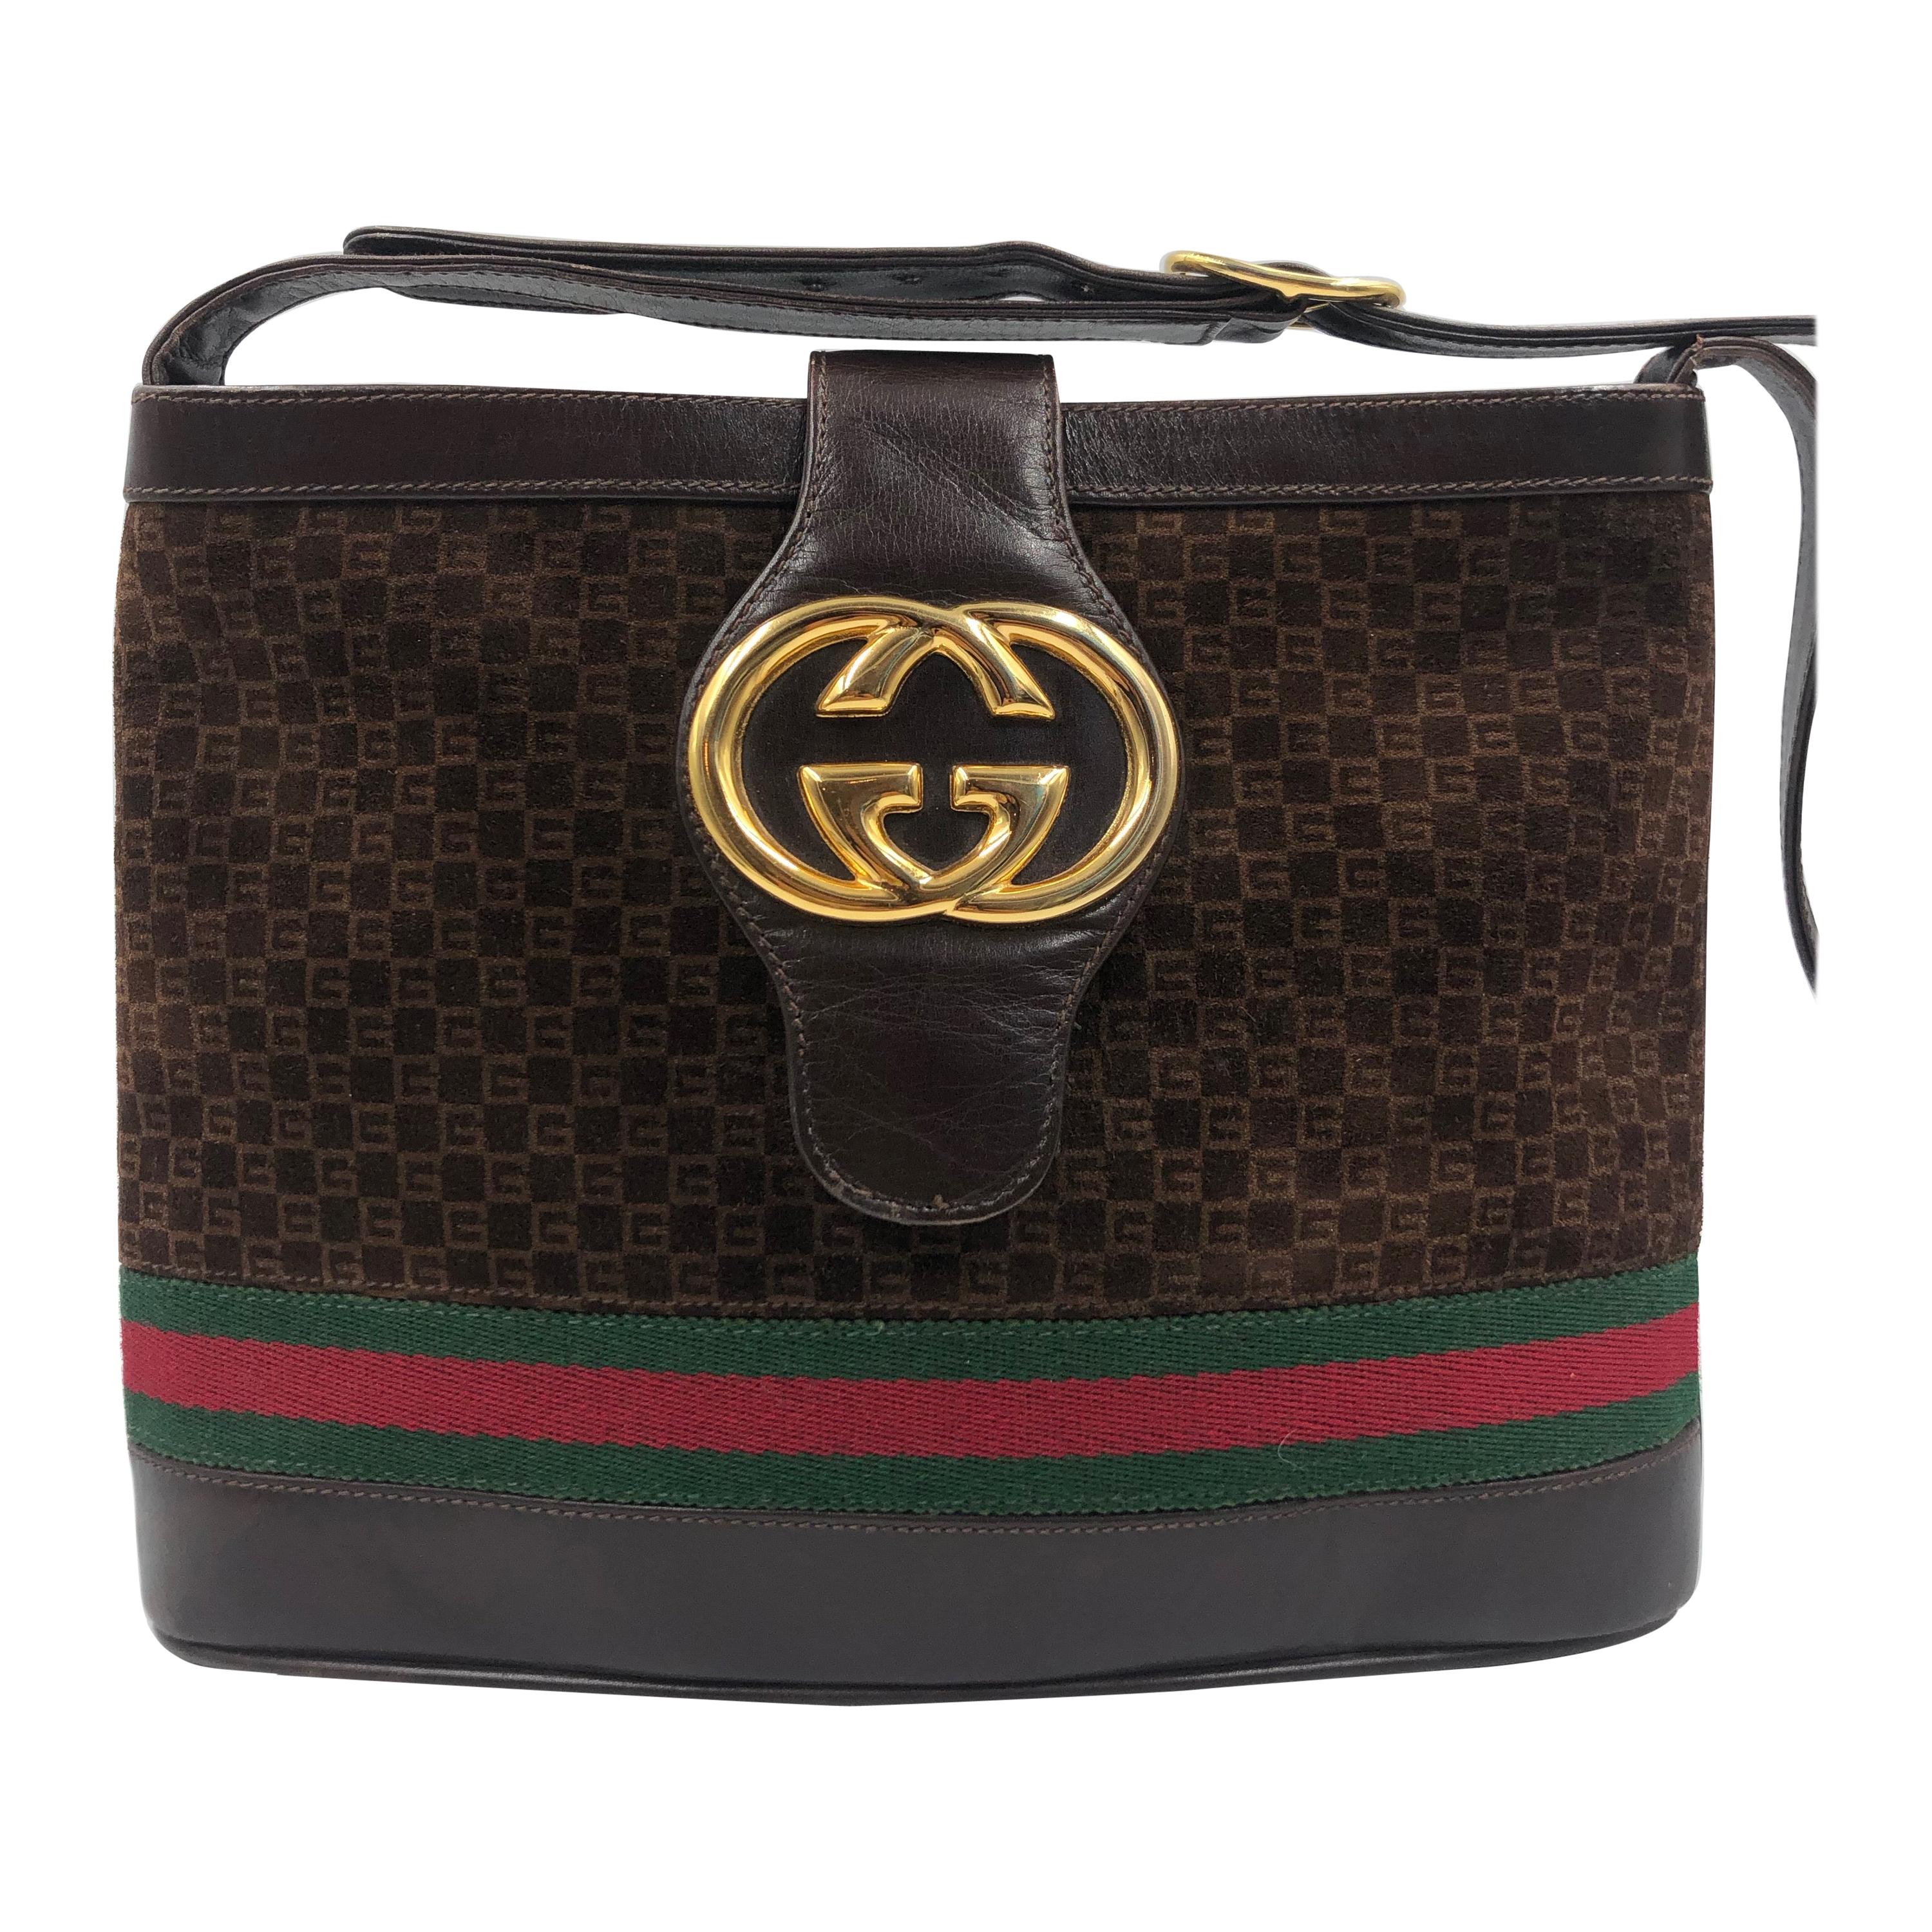 Gucci Brown Suede Bucket Bag with Leather Snap Closure